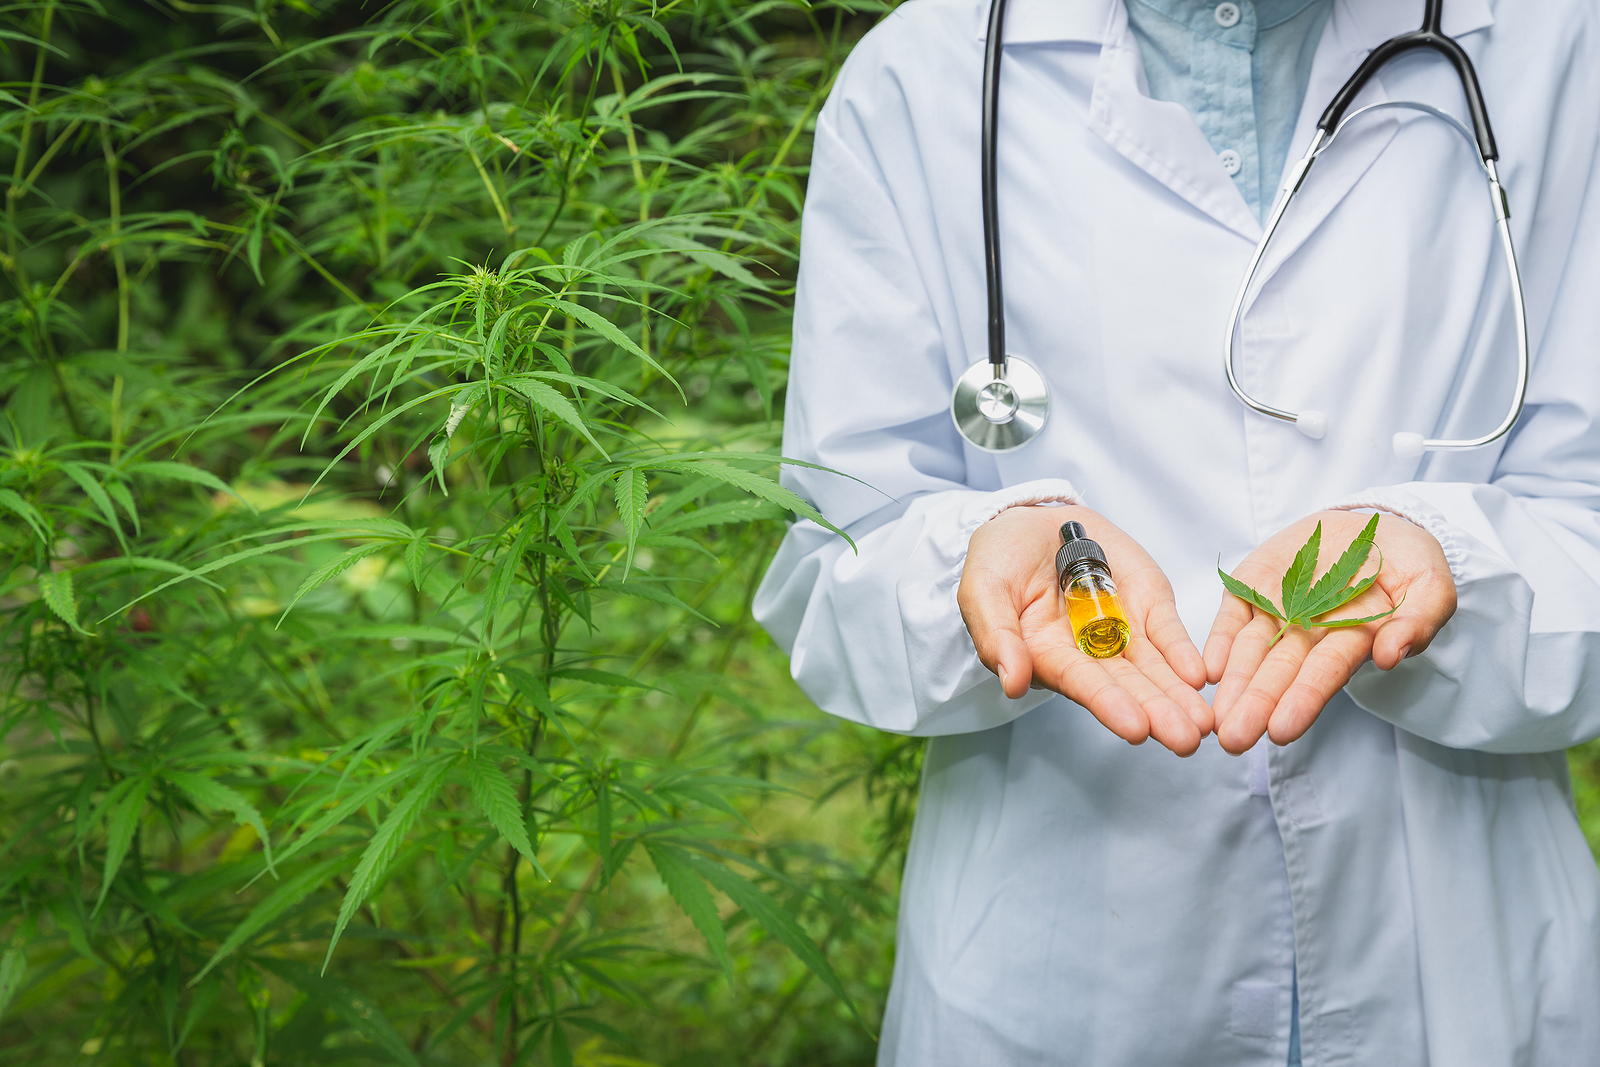 Medical vs Recreational Cannabis: Which is More Profitable to Sell?